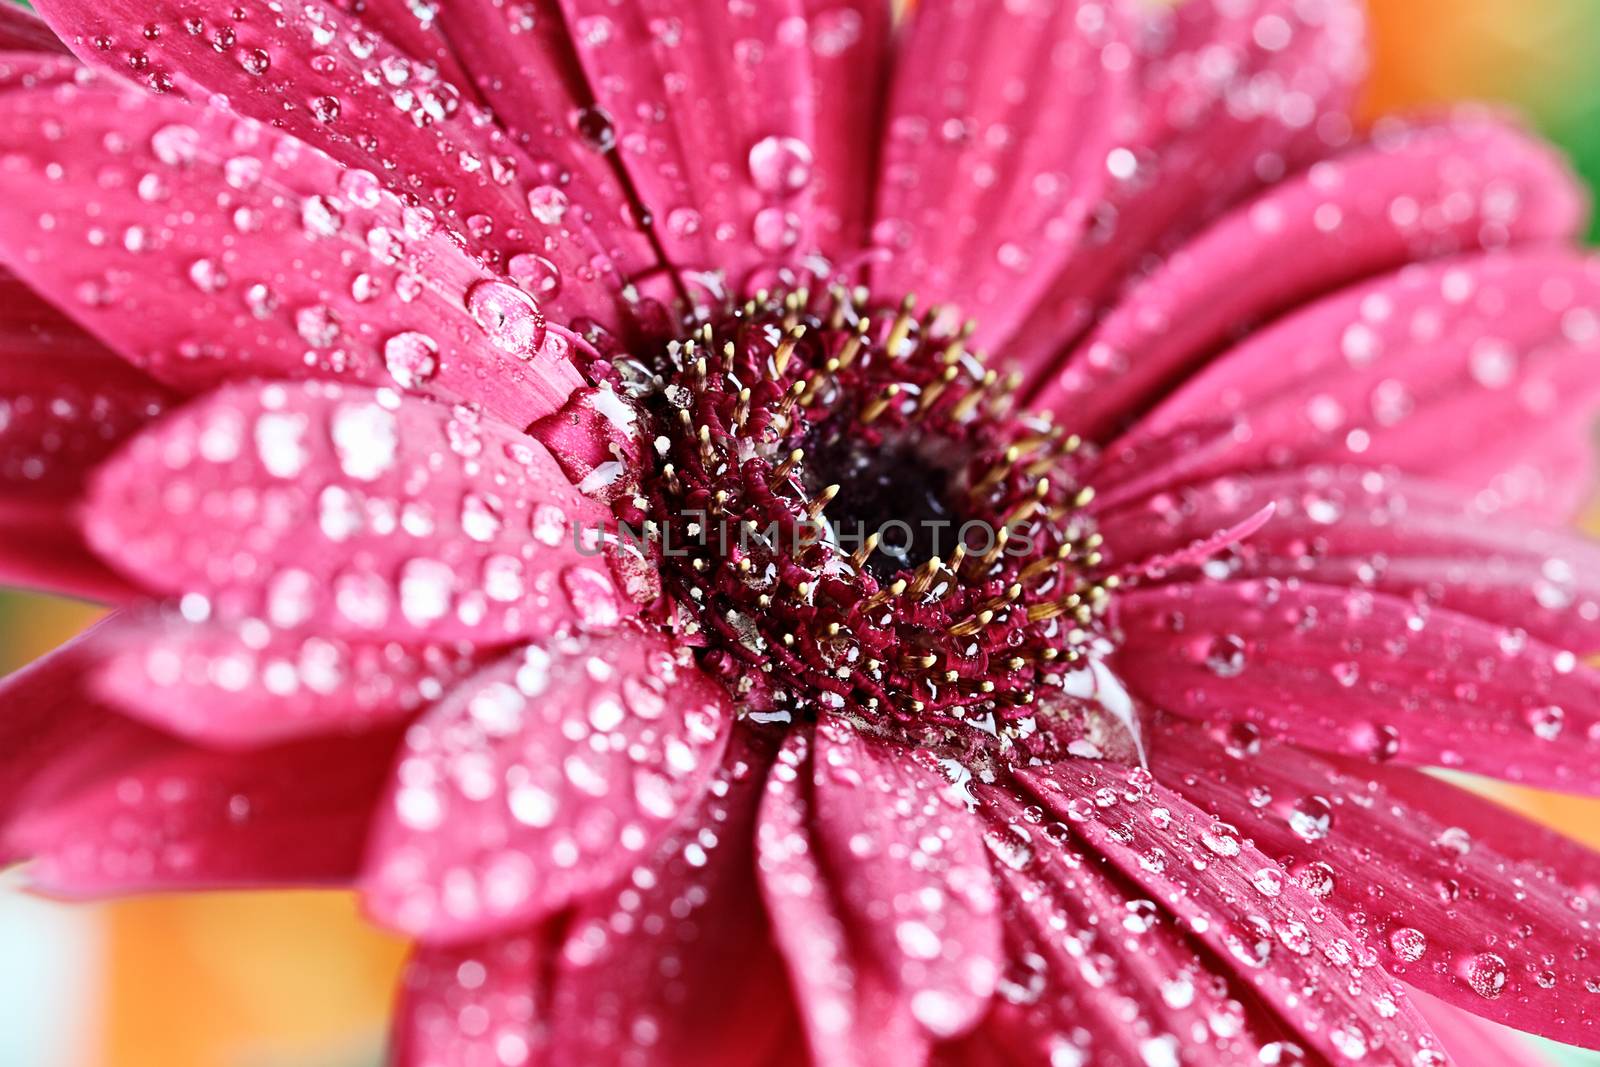 Pink gerber daisy macro with water droplets on the petals.. Extreme shallow depth of field.